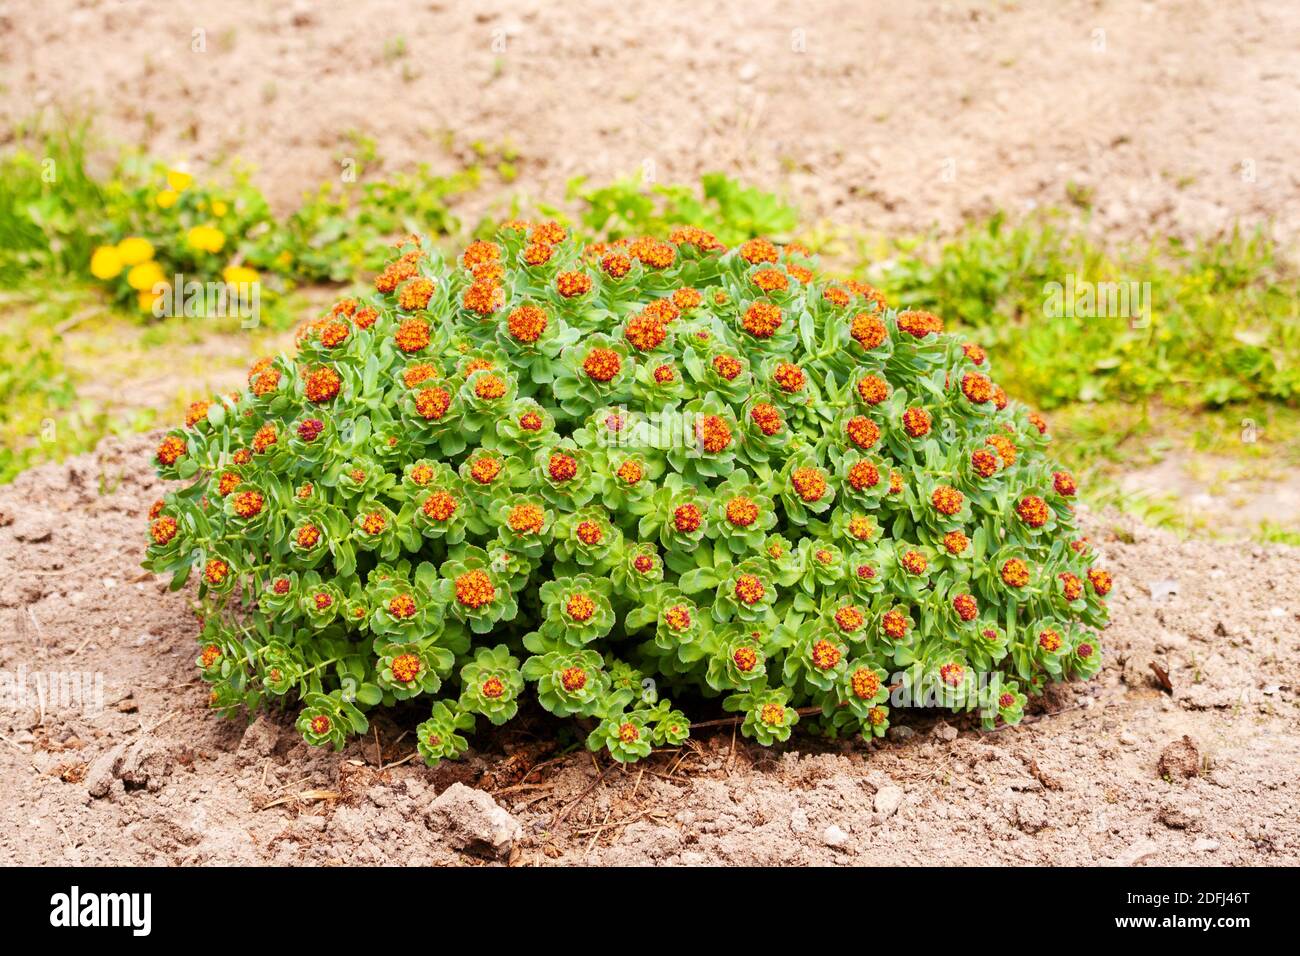 Rhodiola bush with red flowers Stock Photo